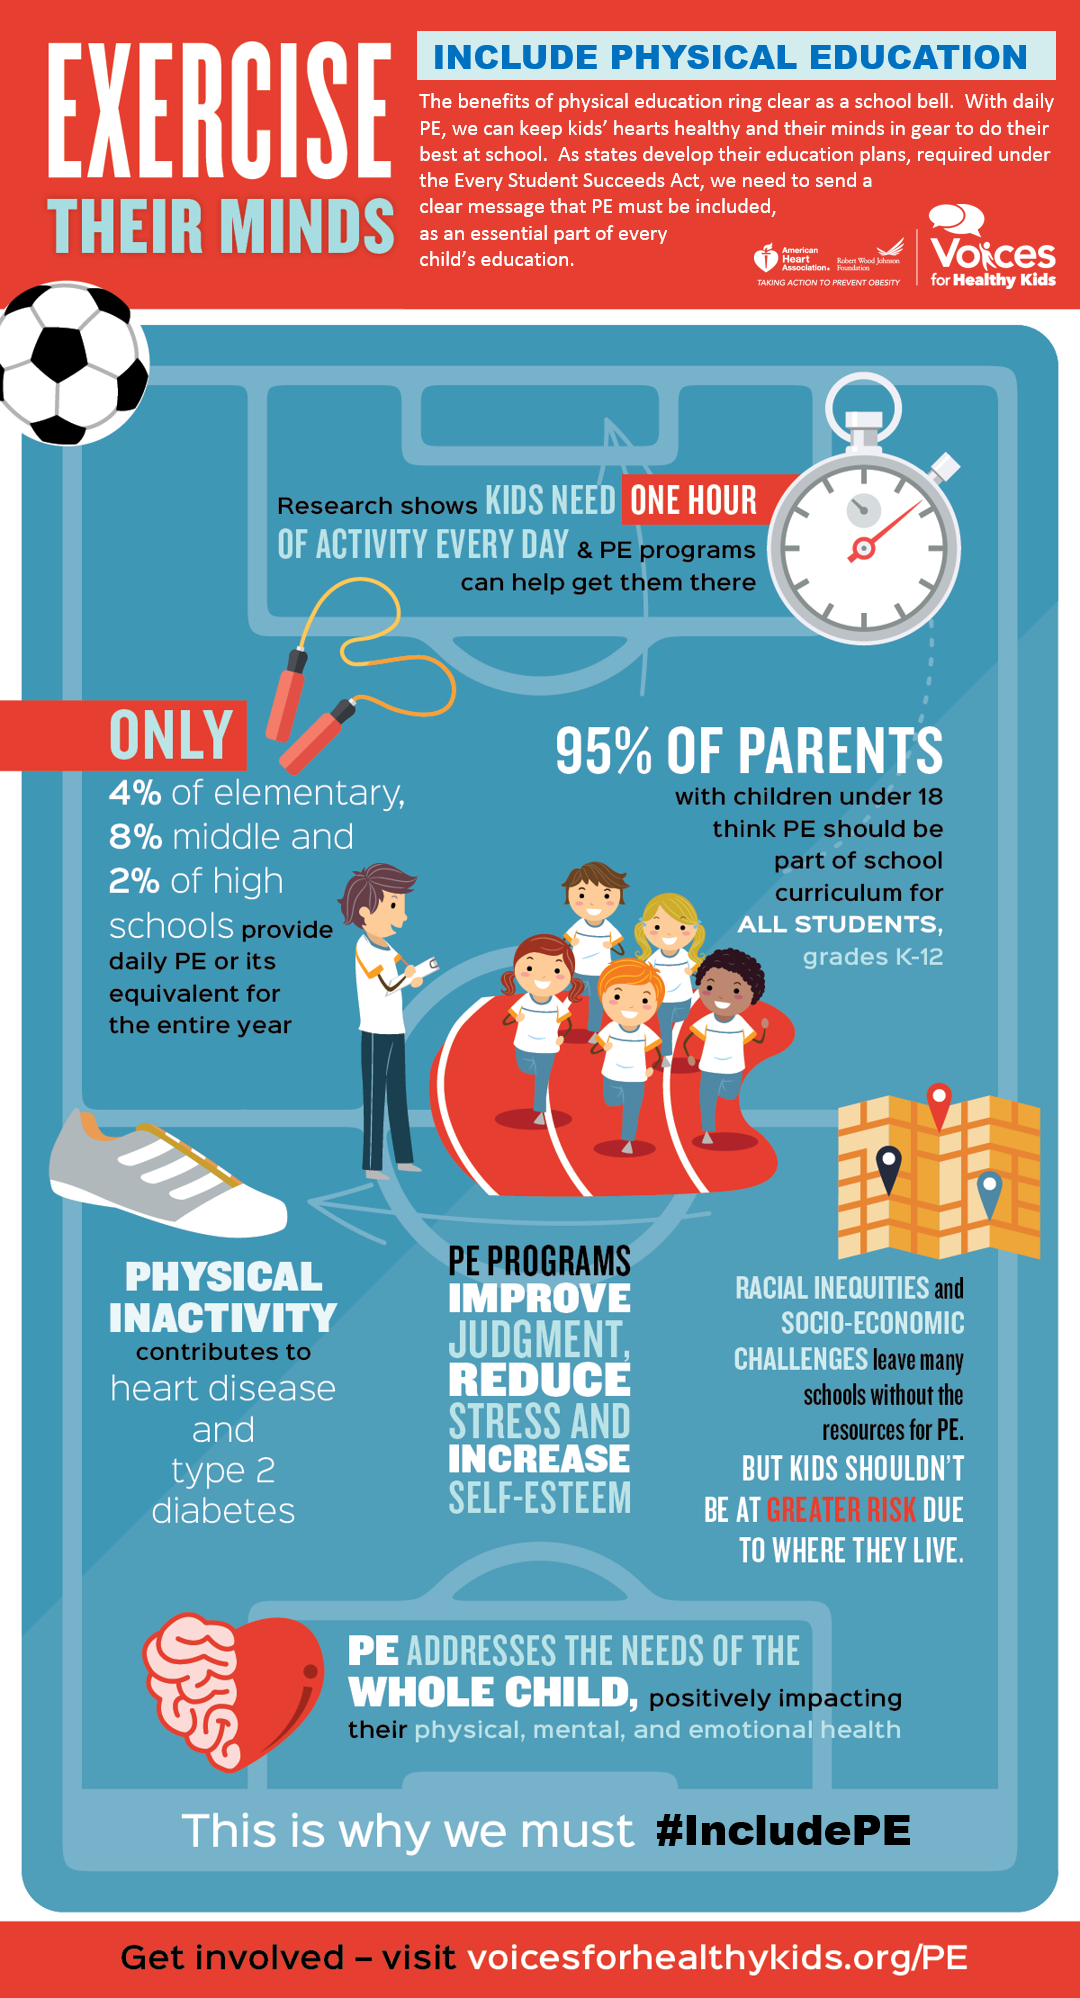 Why Is It Important to Have Physical Education in School?